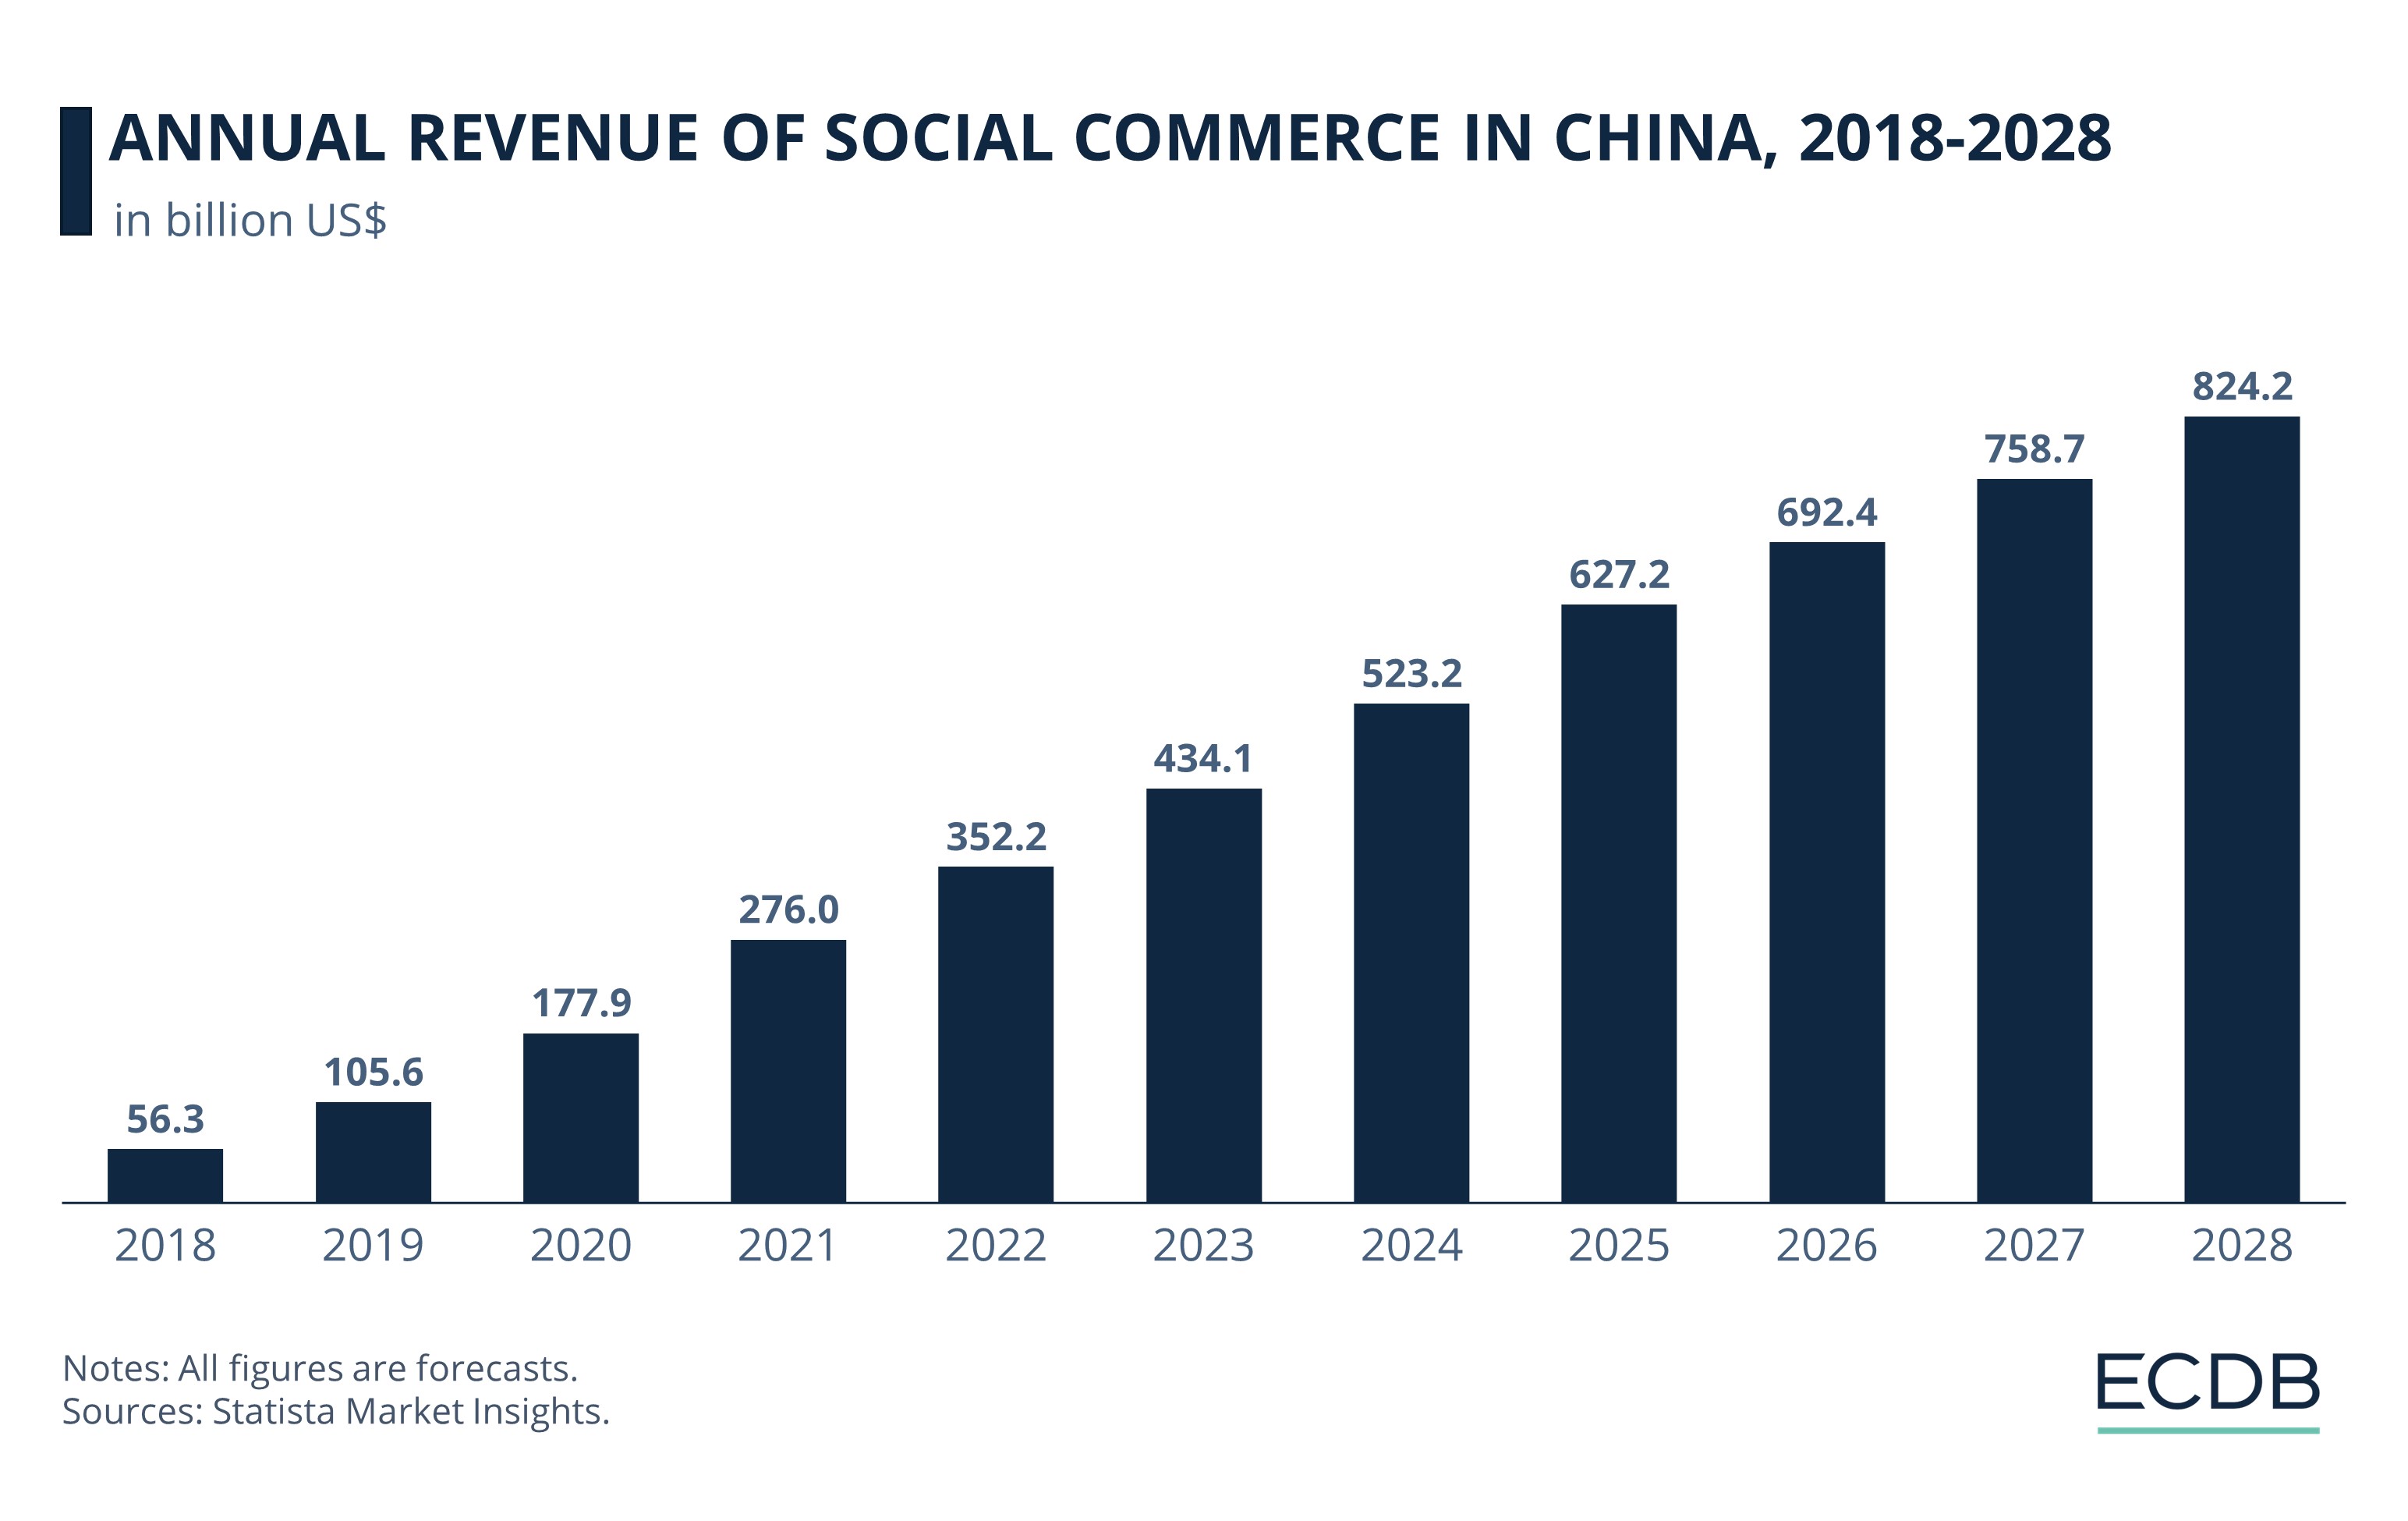 Annual Revenue of Social Commerce in China, 2018-2028